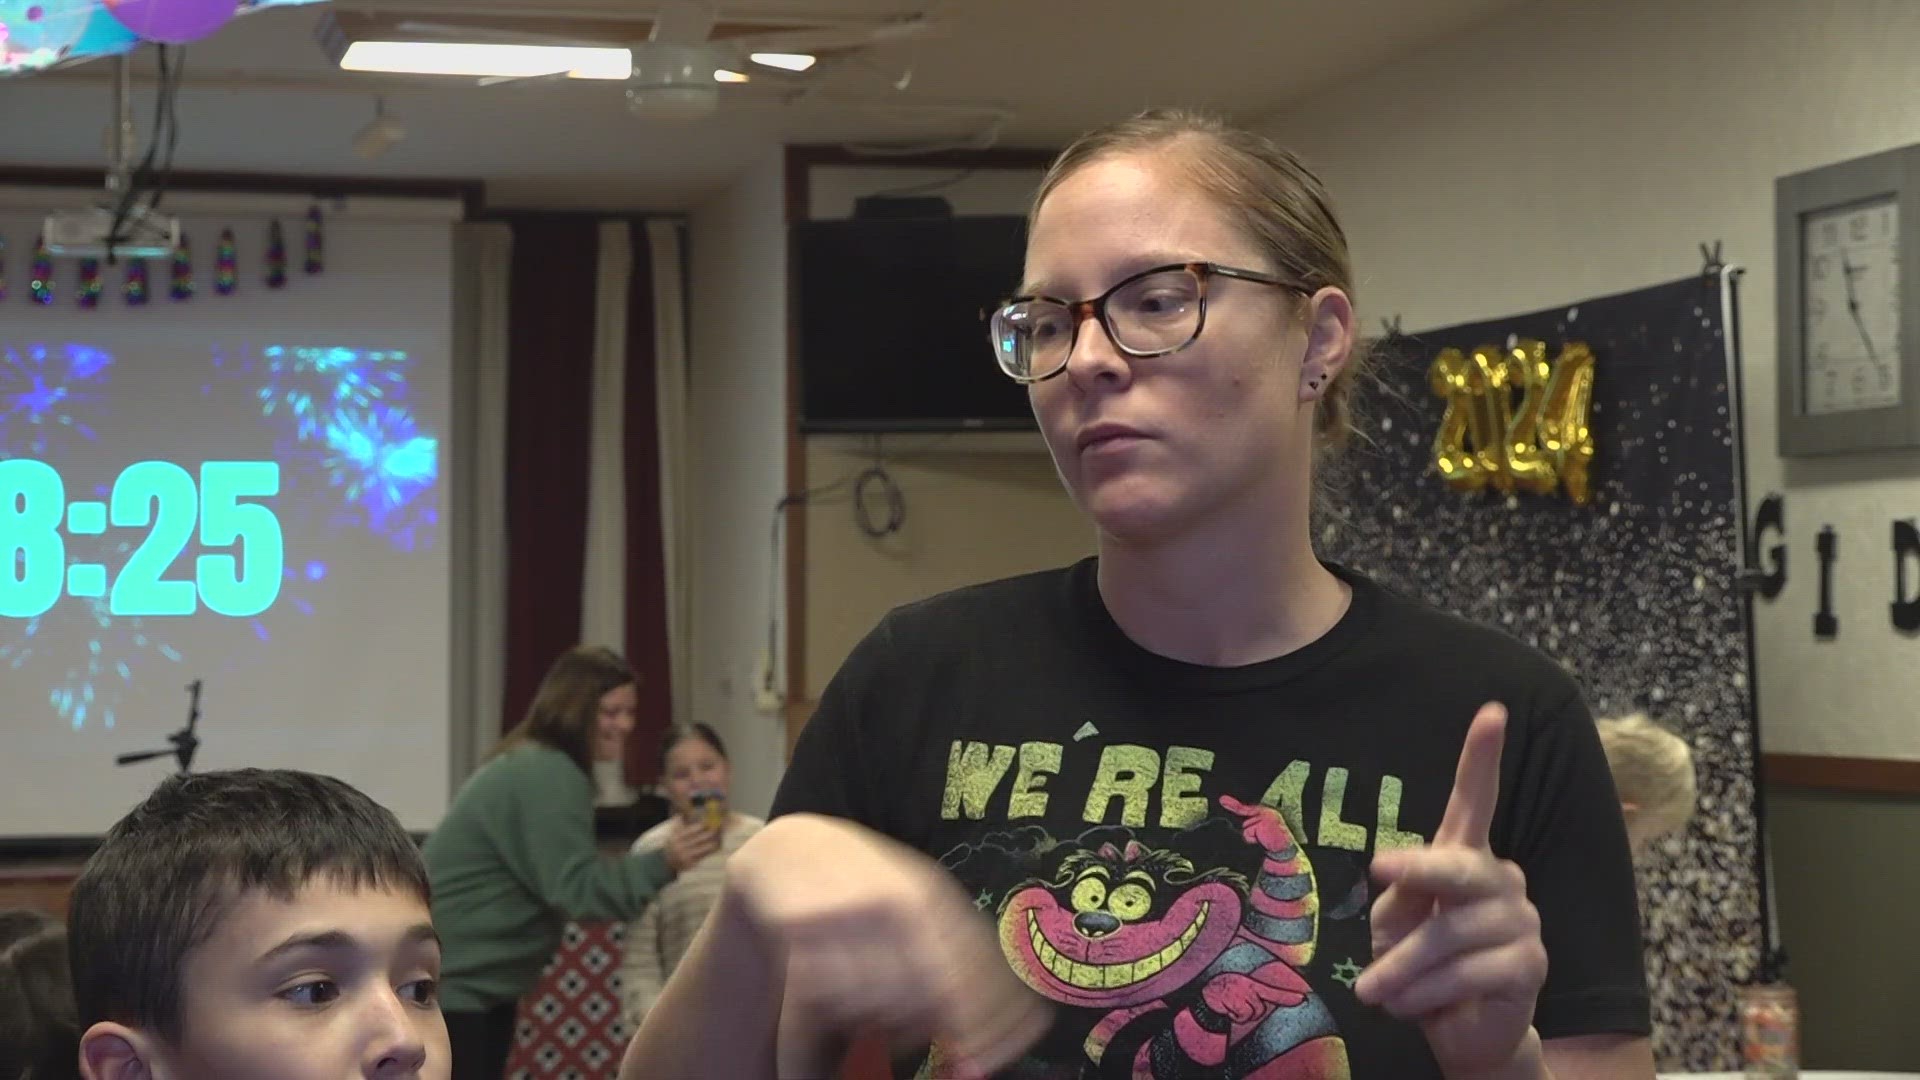 13News reporter Anna Chalker reports from the Greater Indianapolis Deaf Club's "Noon New Year's Eve" party.